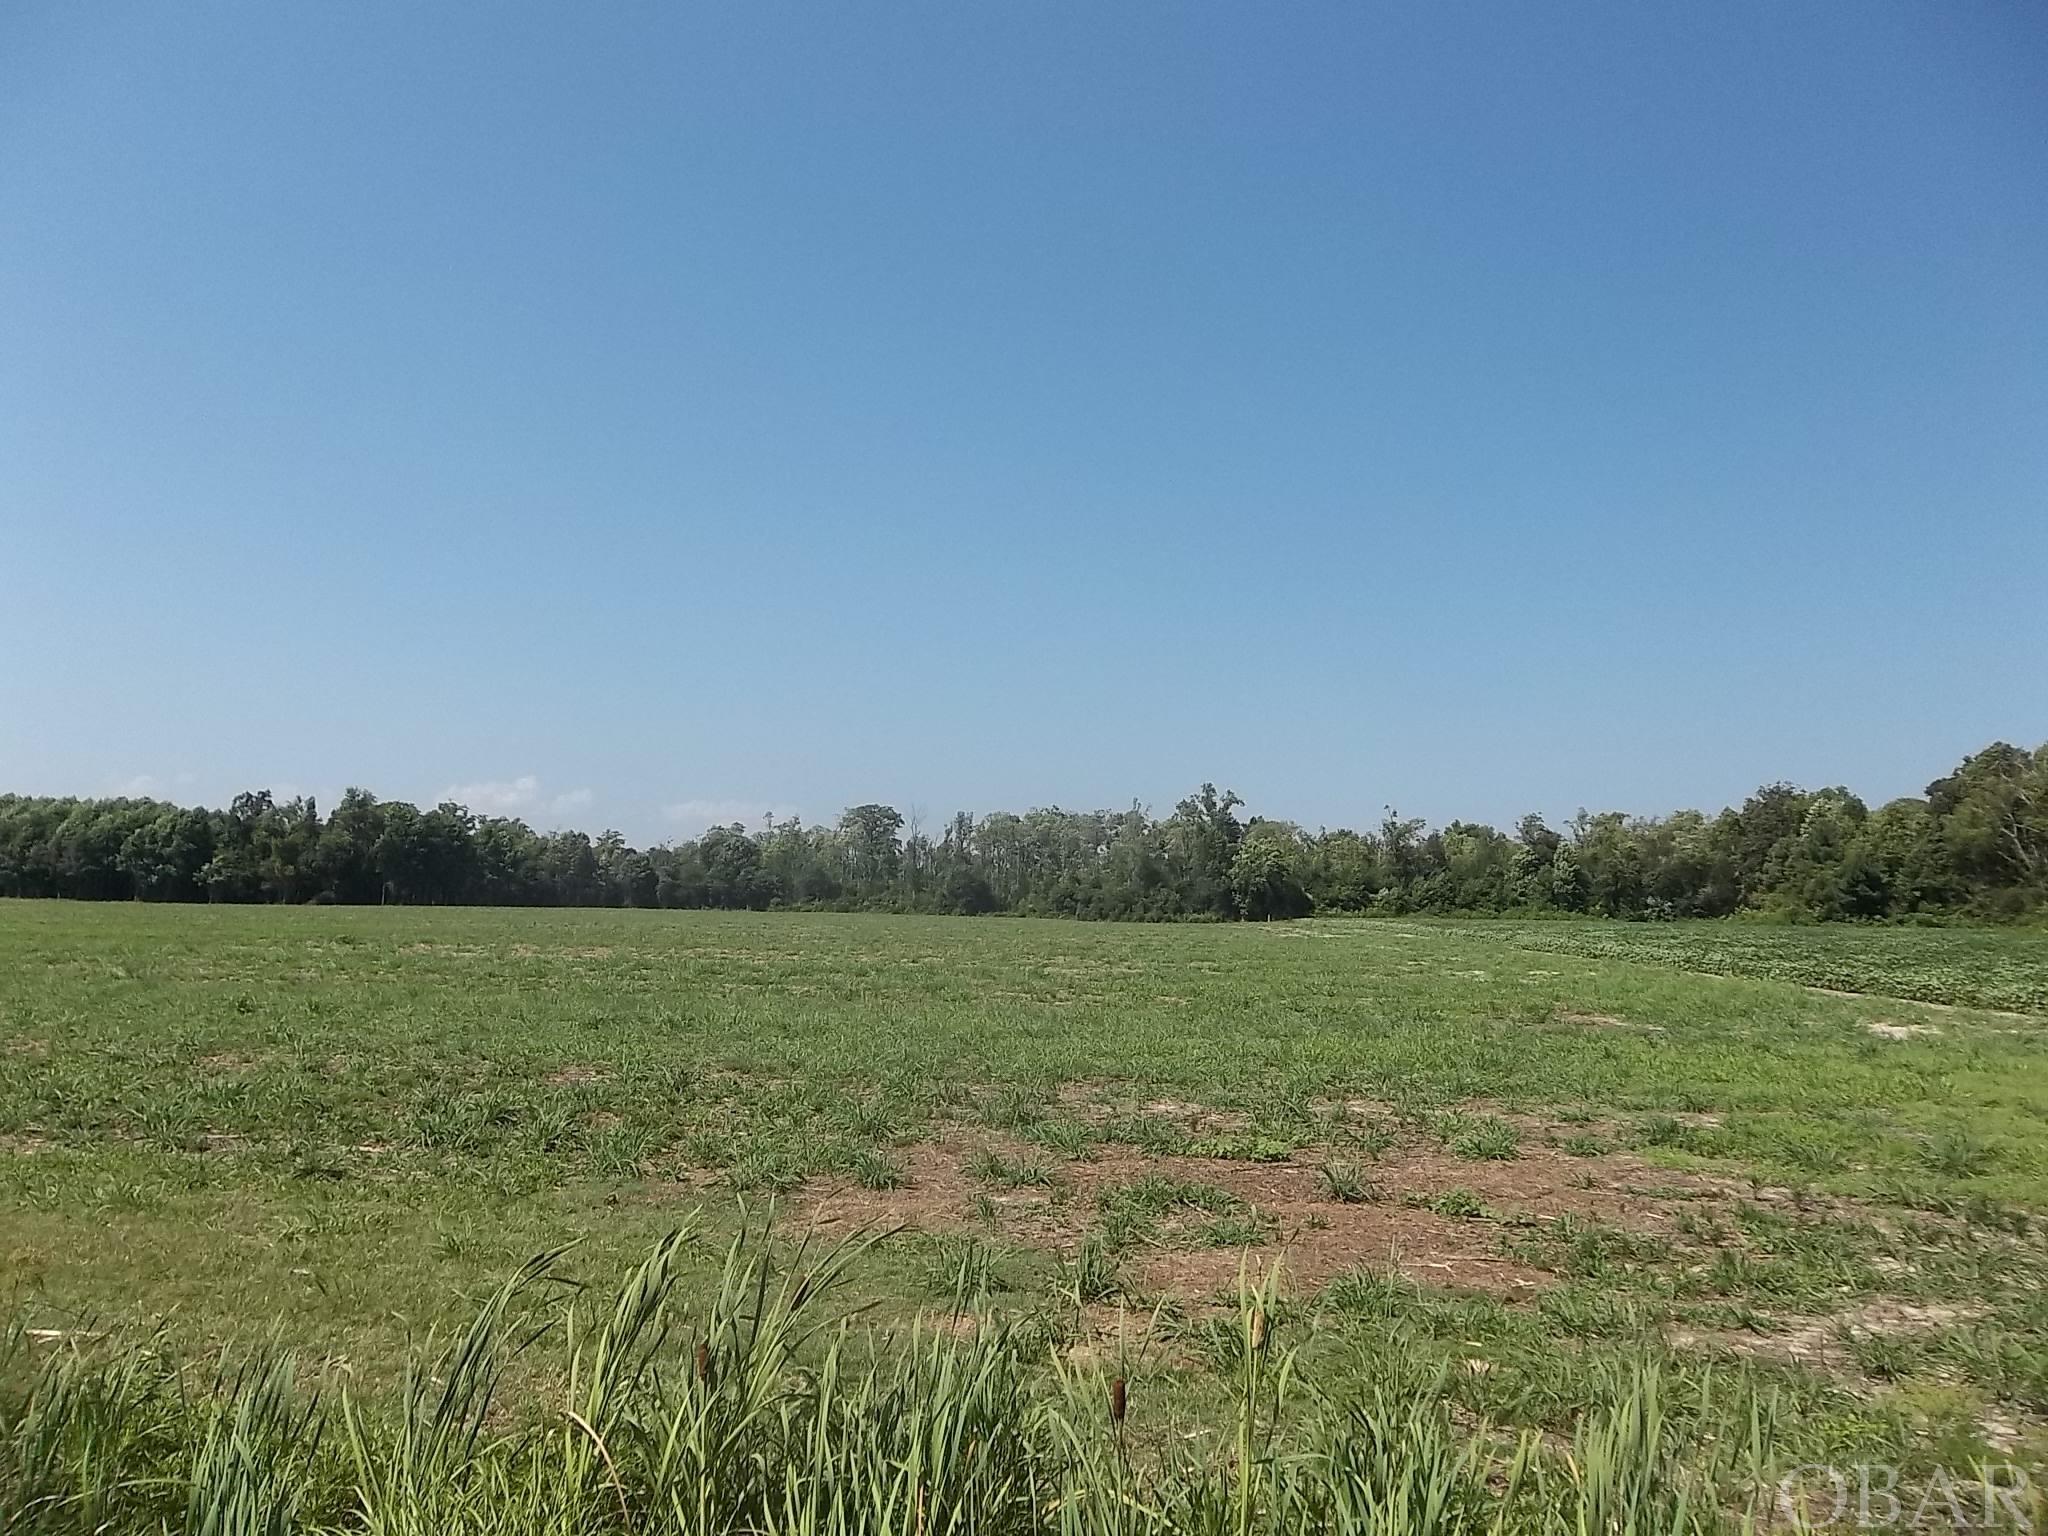 10 Acres with no HOA or deed restrictions. Perfect for your horses or just a place to spread out. This lot is located in a tranquil setting, and you still have an easy commute to Elizabeth City, Outer Banks, or the Hampton Roads area.   The edge of the ten-acre lot is bordered by a creek that leads to the Pasquotank River. There is a wooded area between the water and the lot that has cool breezes and plenty of shade. Lots are cleared and ready to build on. The front of the lot is located in an X flood zone  Aerial photos and videos show the entire 100-acre and Parcel.